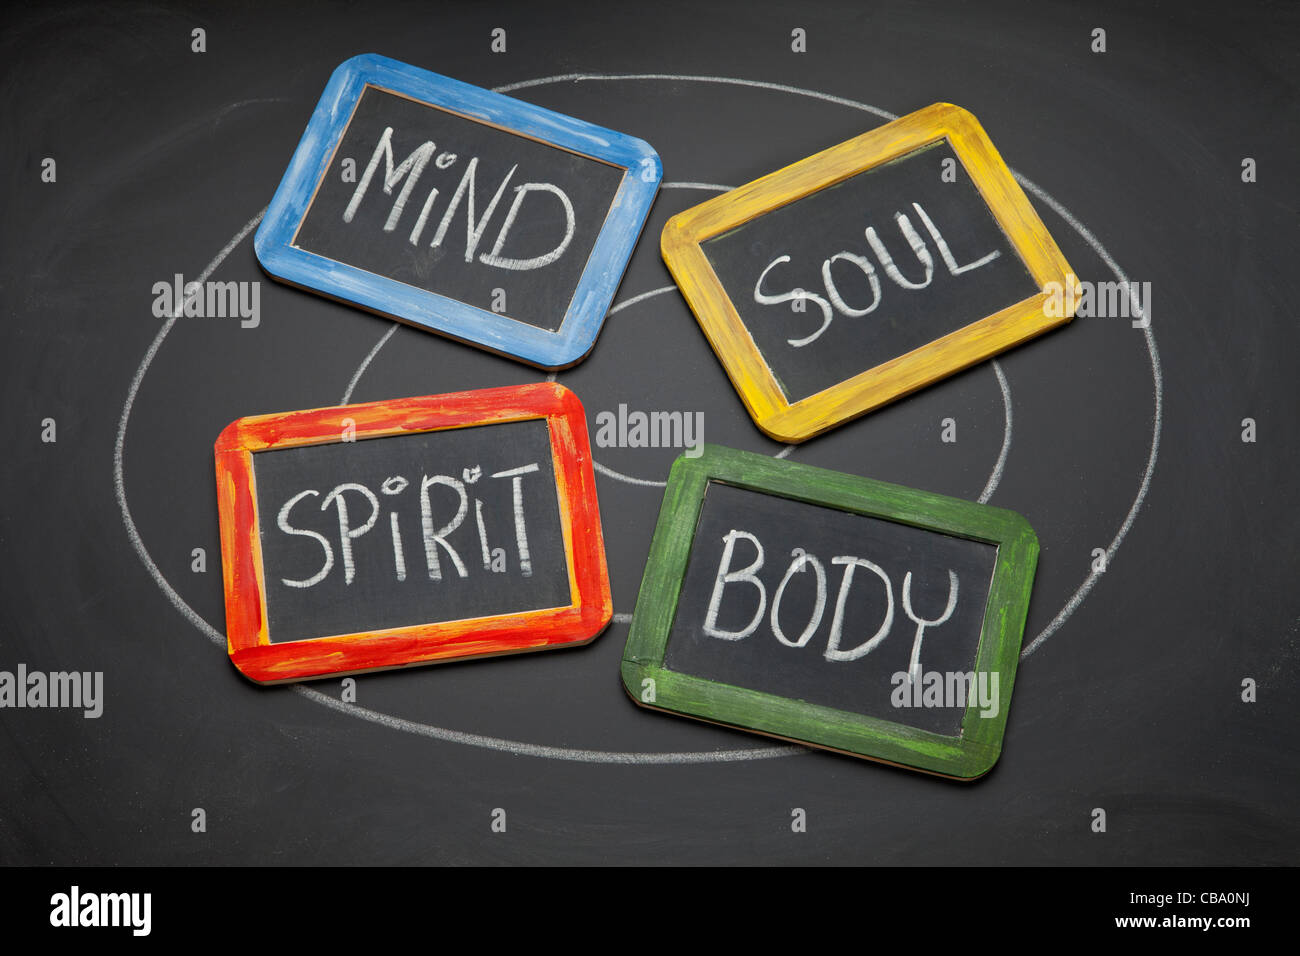 body, mind, soul, spirit - personal growth or development concept presented with white chalk and small slate blackboards Stock Photo